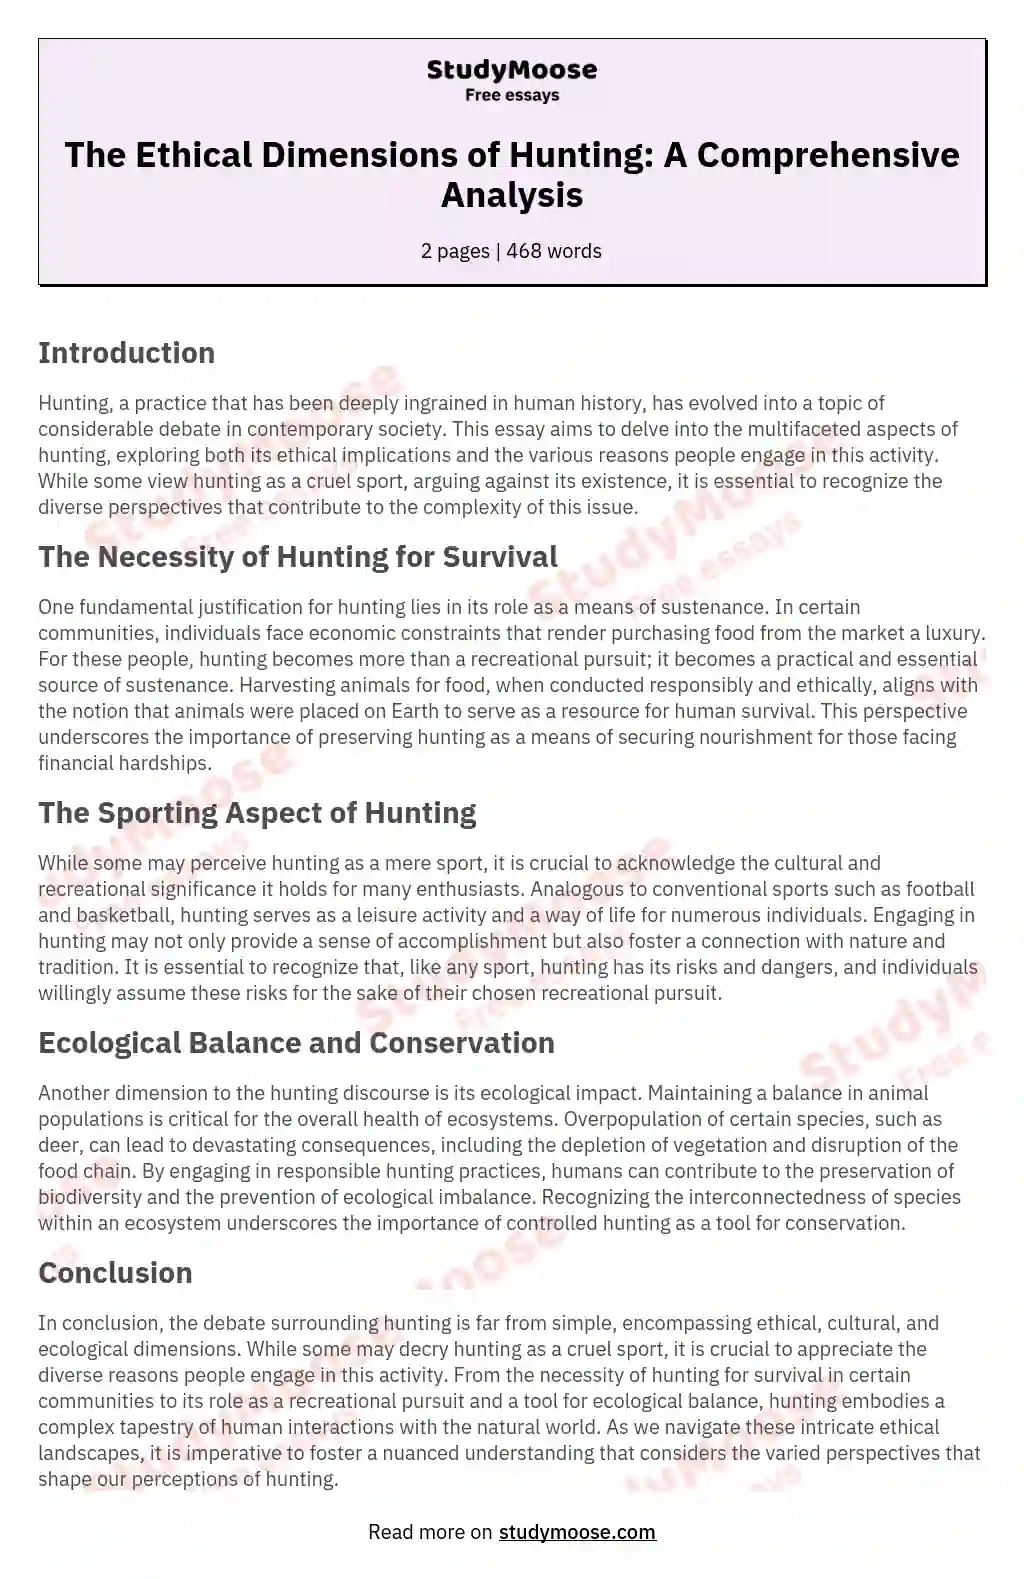 The Ethical Dimensions of Hunting: A Comprehensive Analysis essay